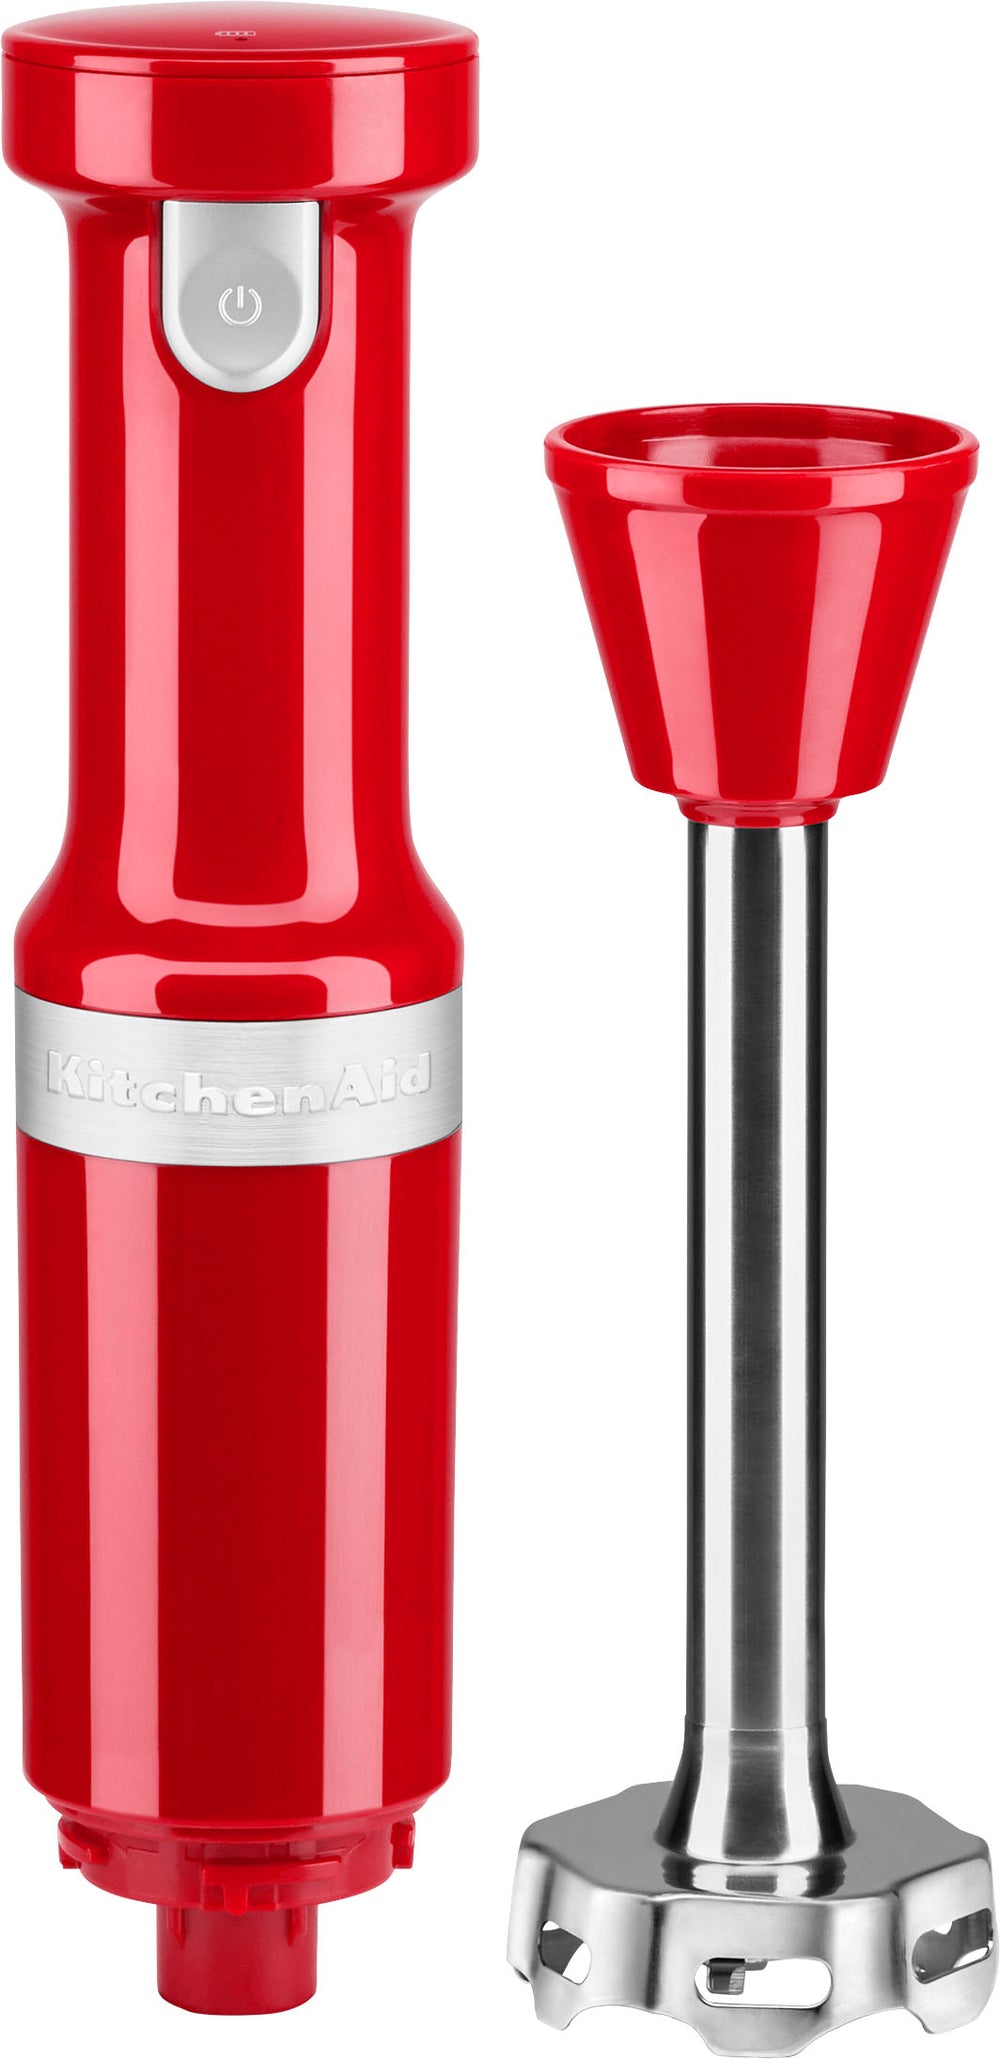 KitchenAid Cordless Variable Speed Hand Blender with Chopper and Whisk attachment - KHBBV83 - Empire Red_1